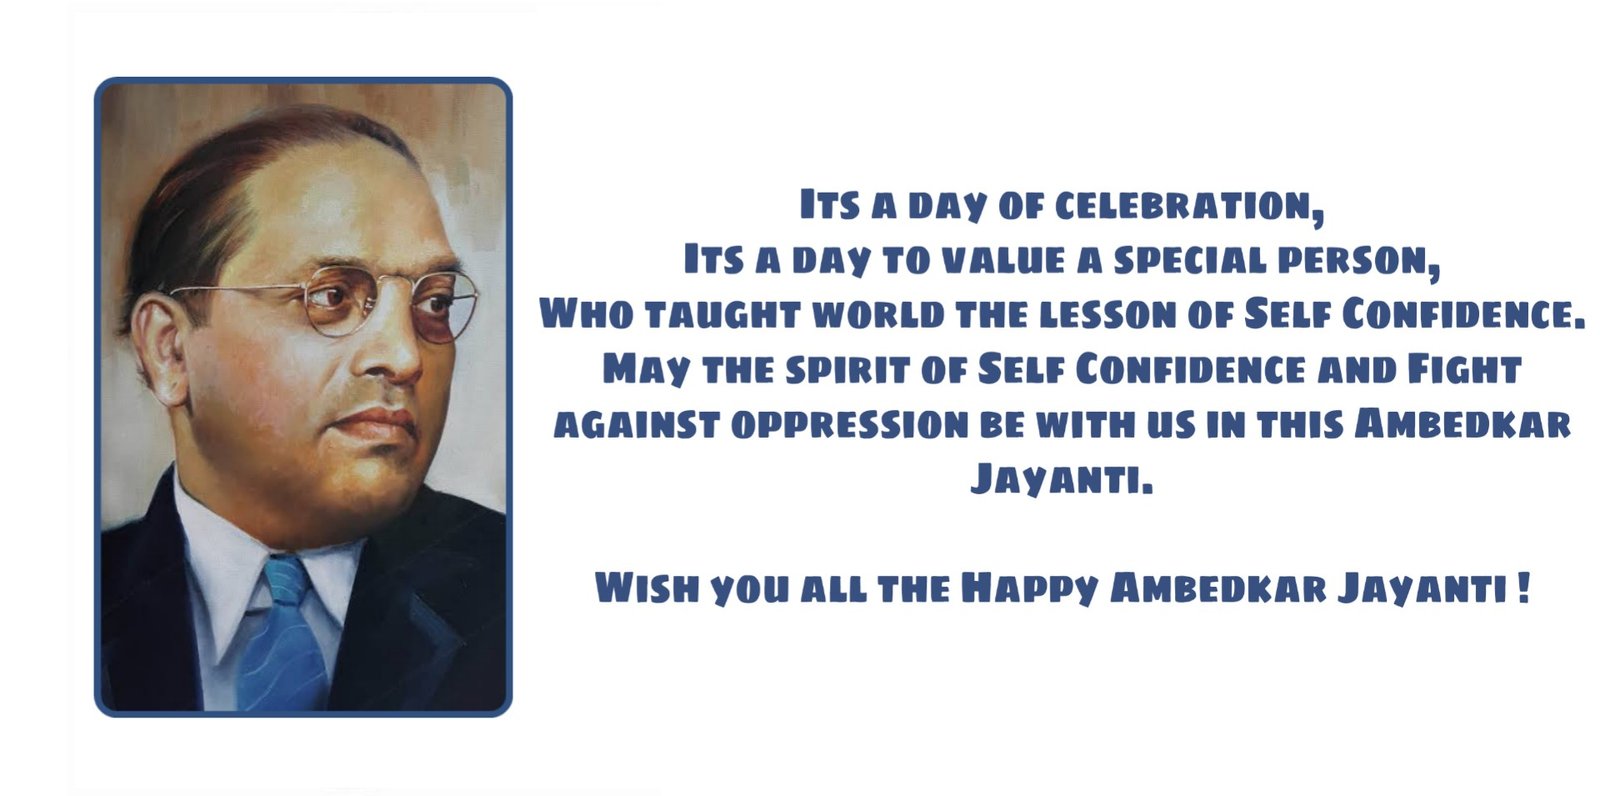 Ambedkar Jayanti Wishes and Greetings, and Significance | VoxyTalksy